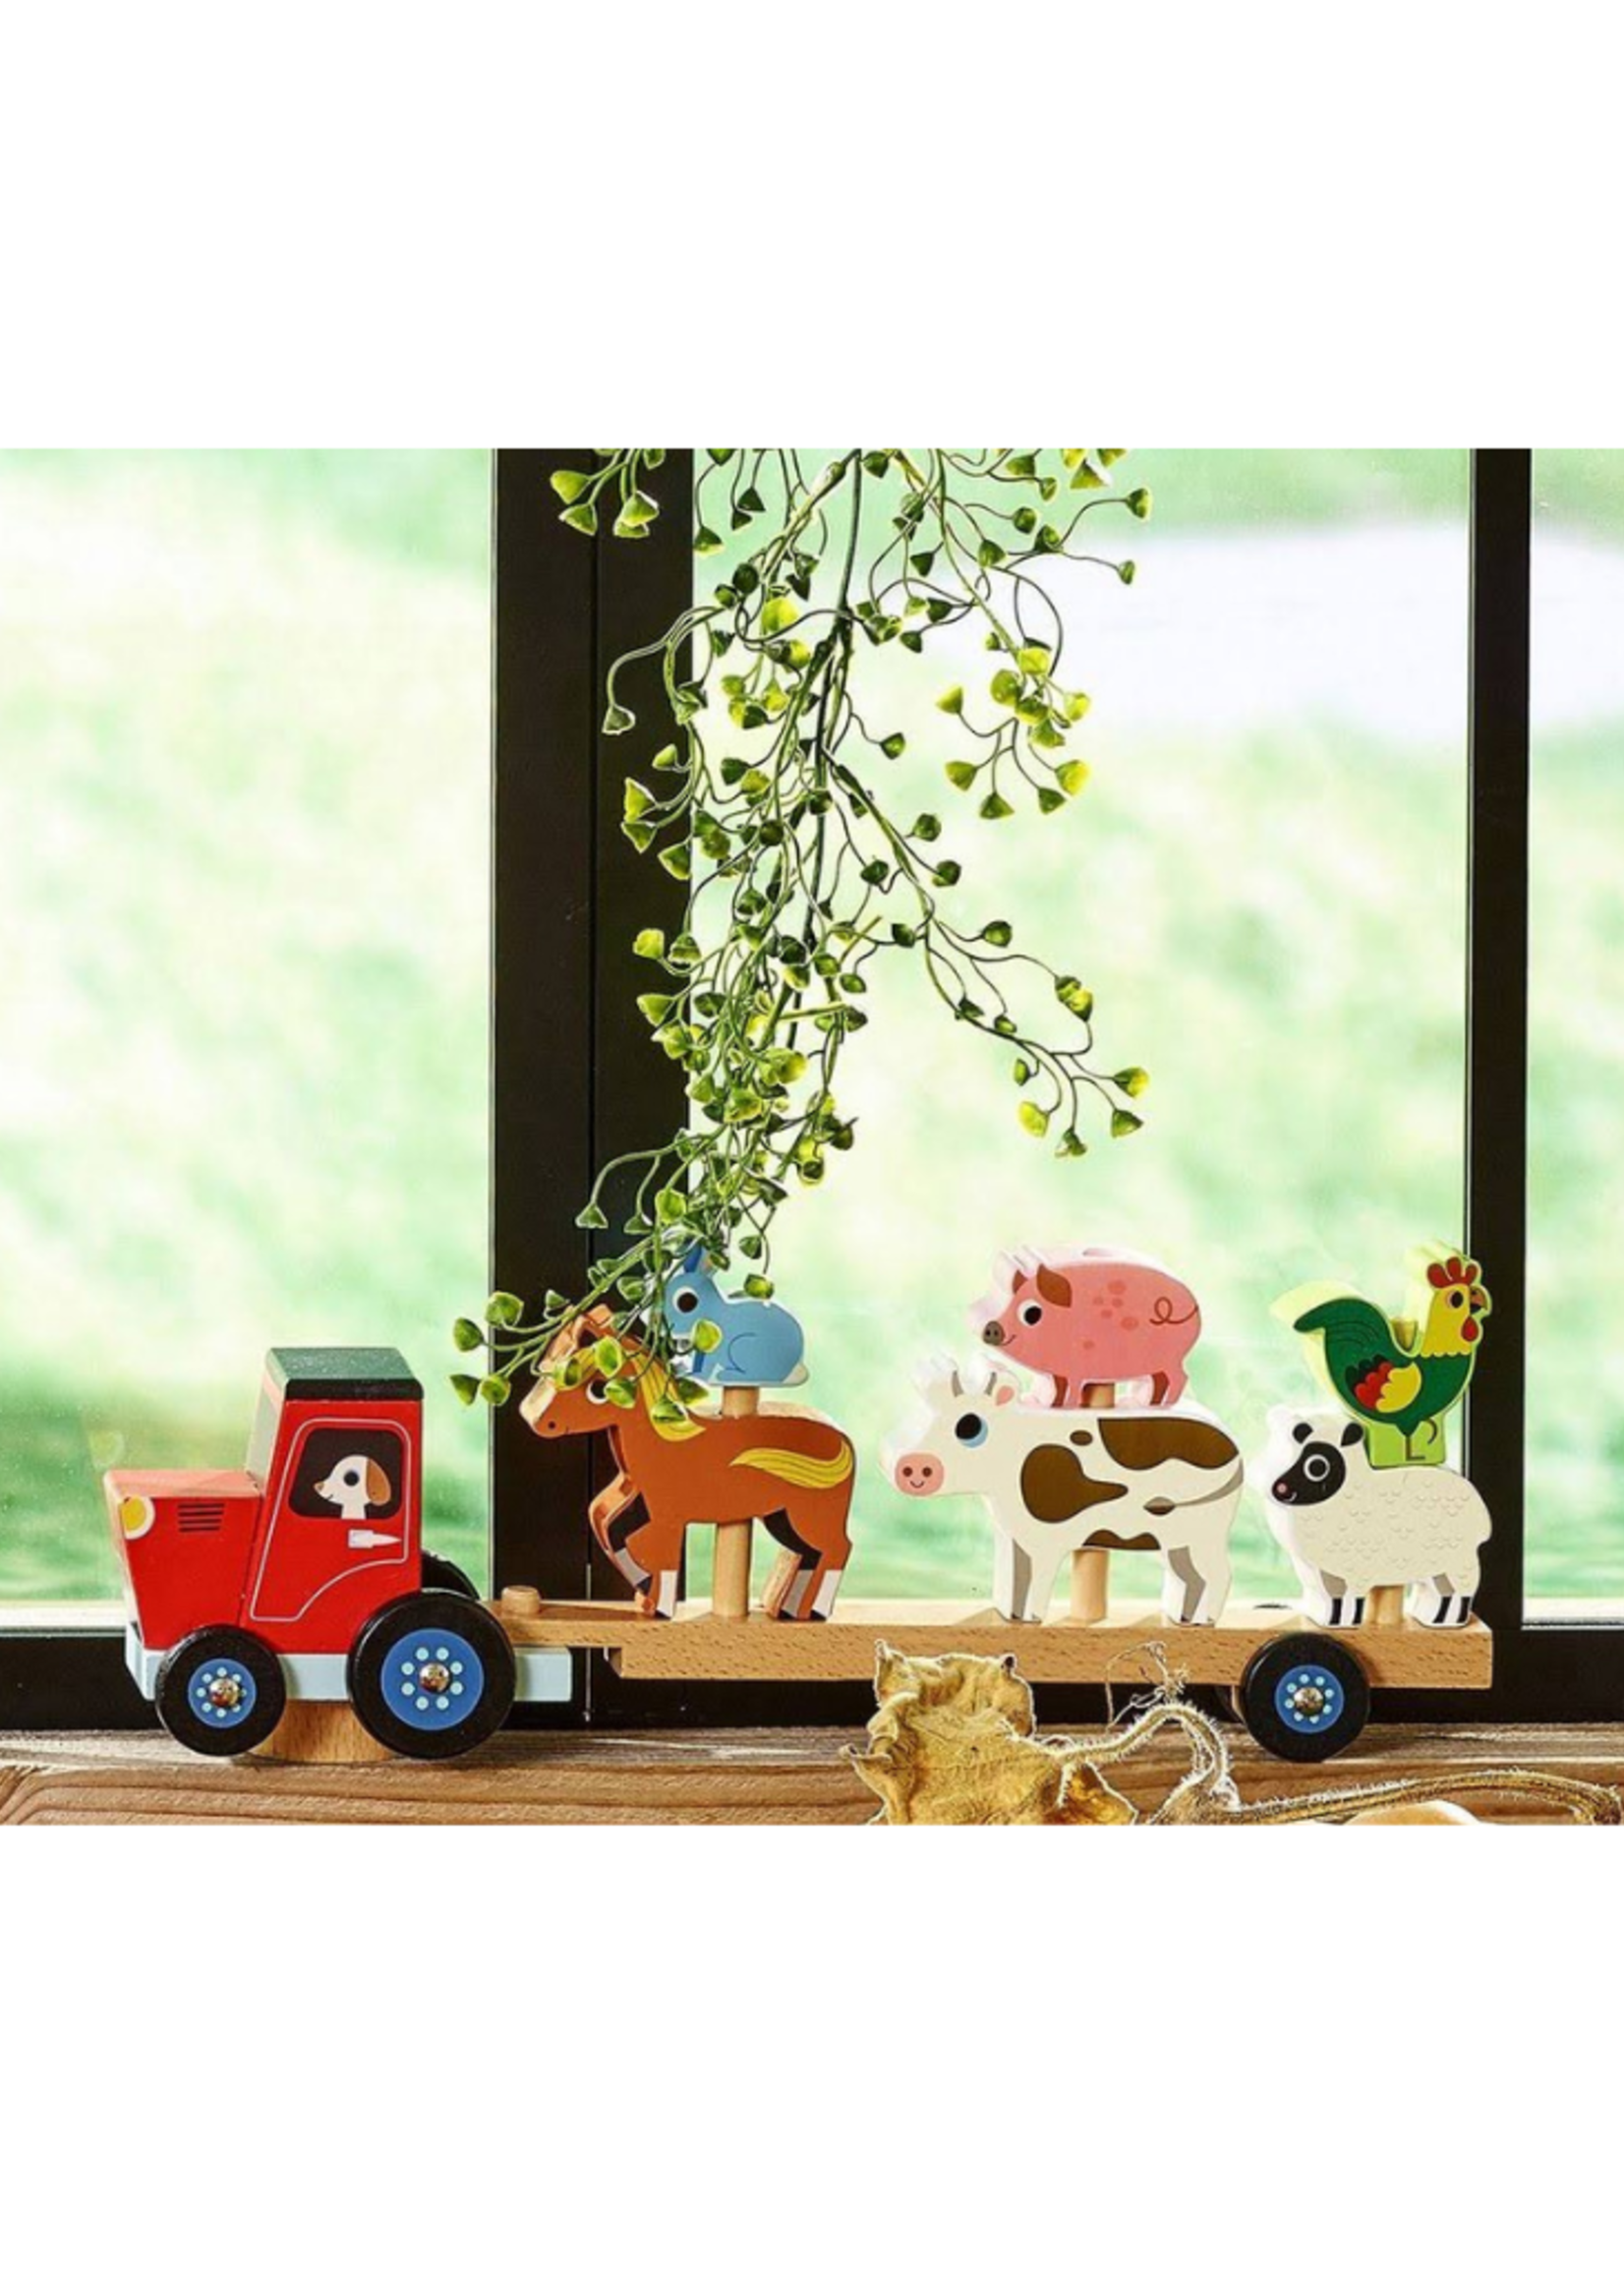 Vilac Stacking Animals Tractor